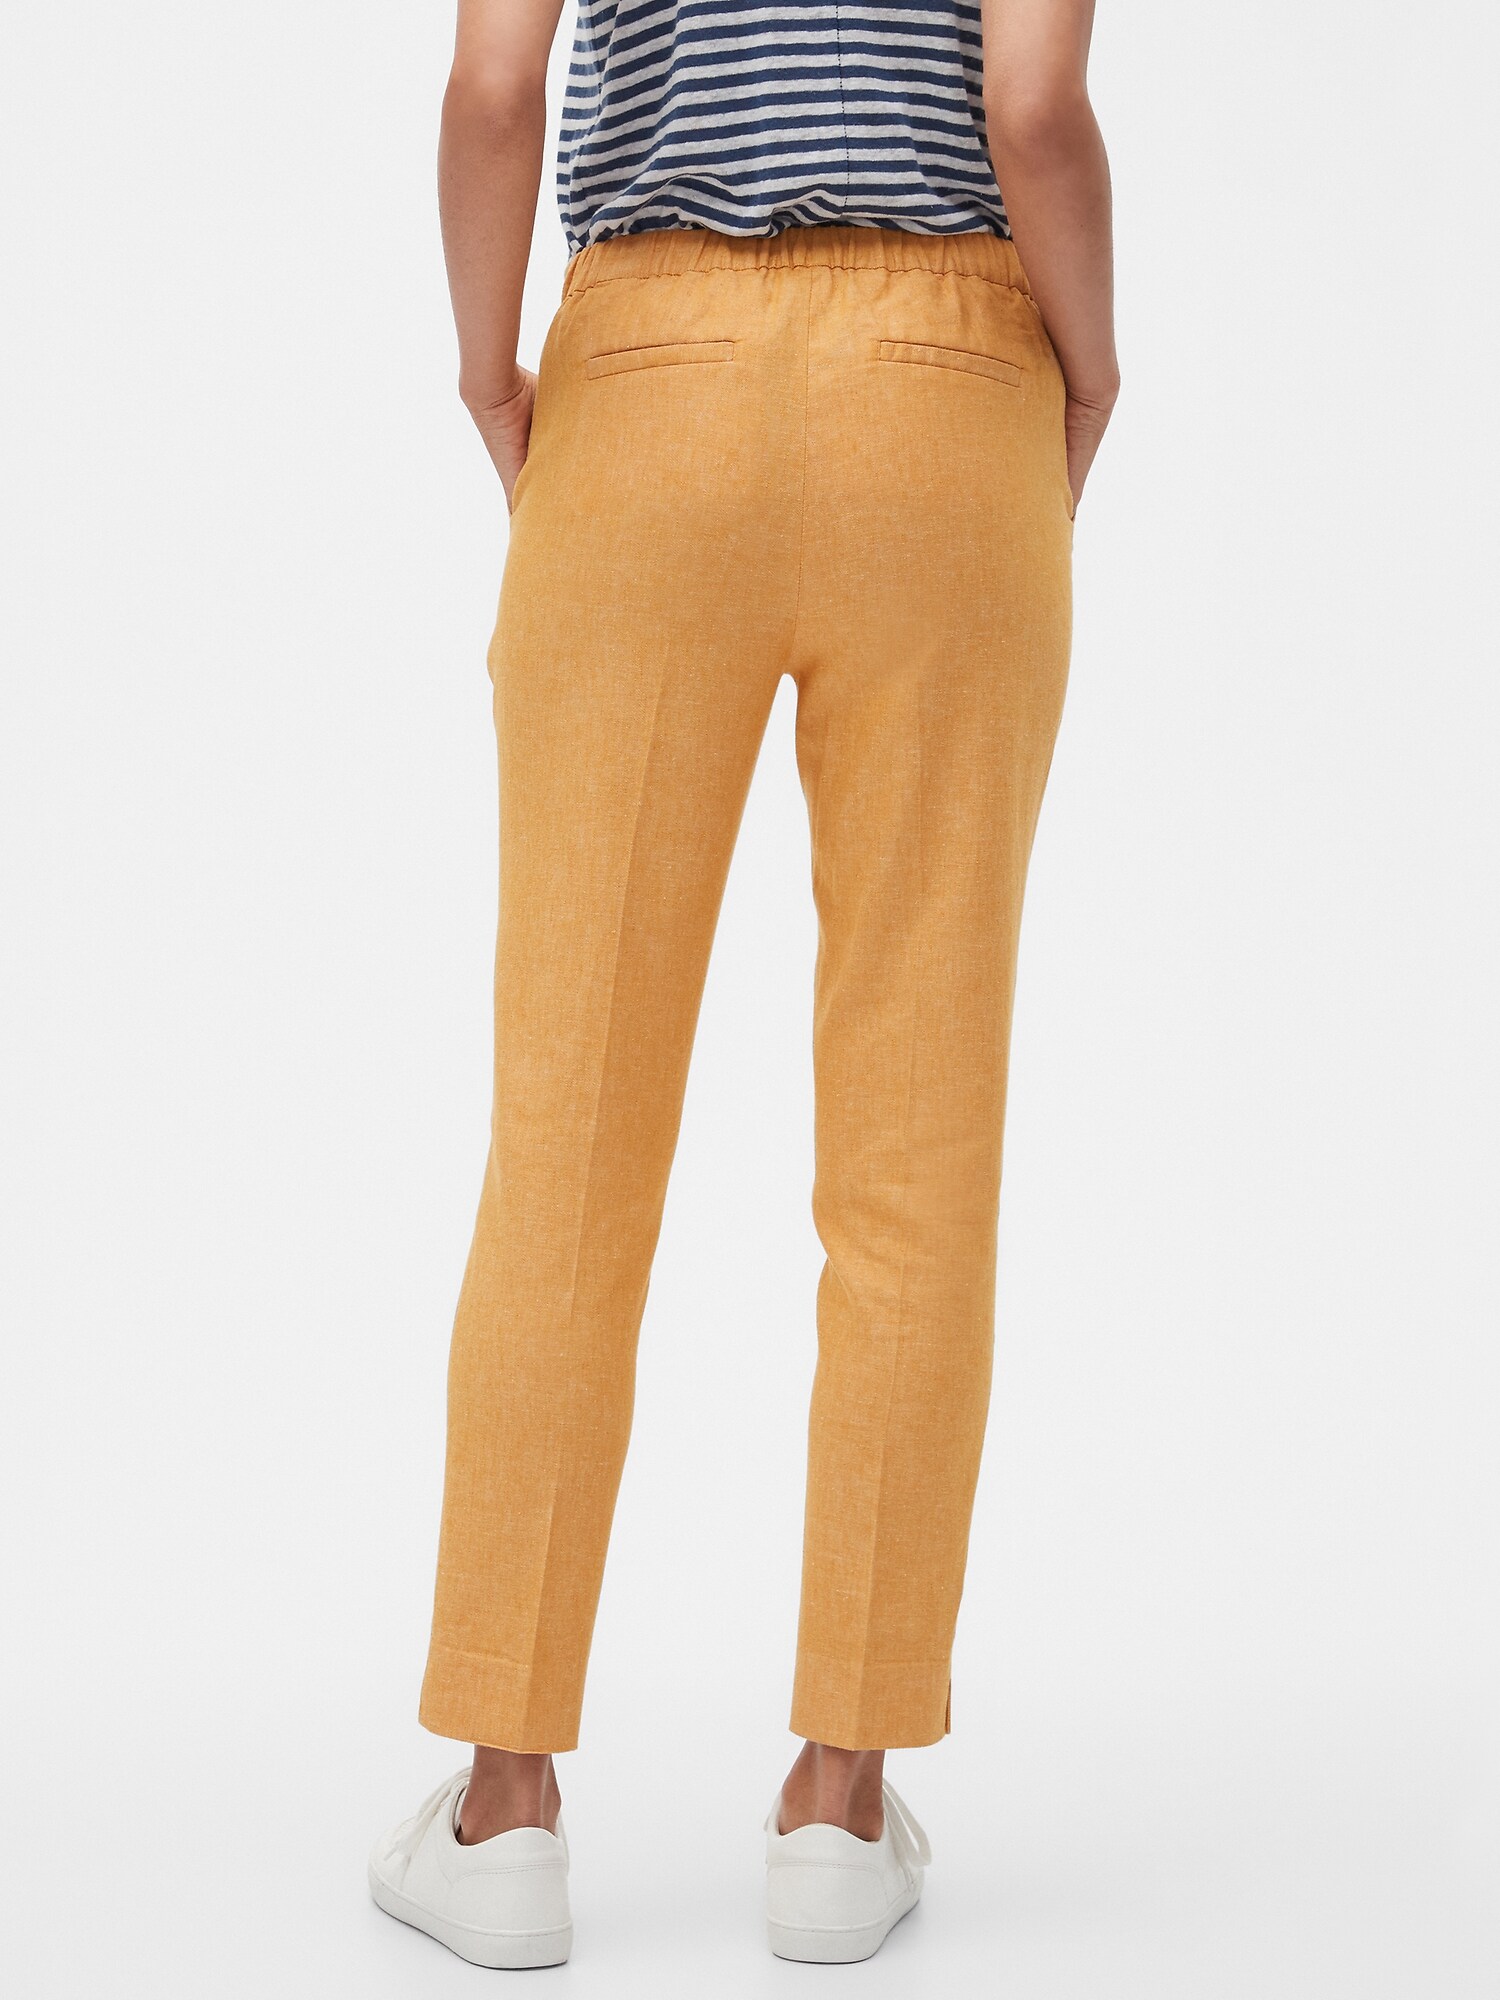 Hayden Stretch Linen Pull-On Soft Ankle Pant